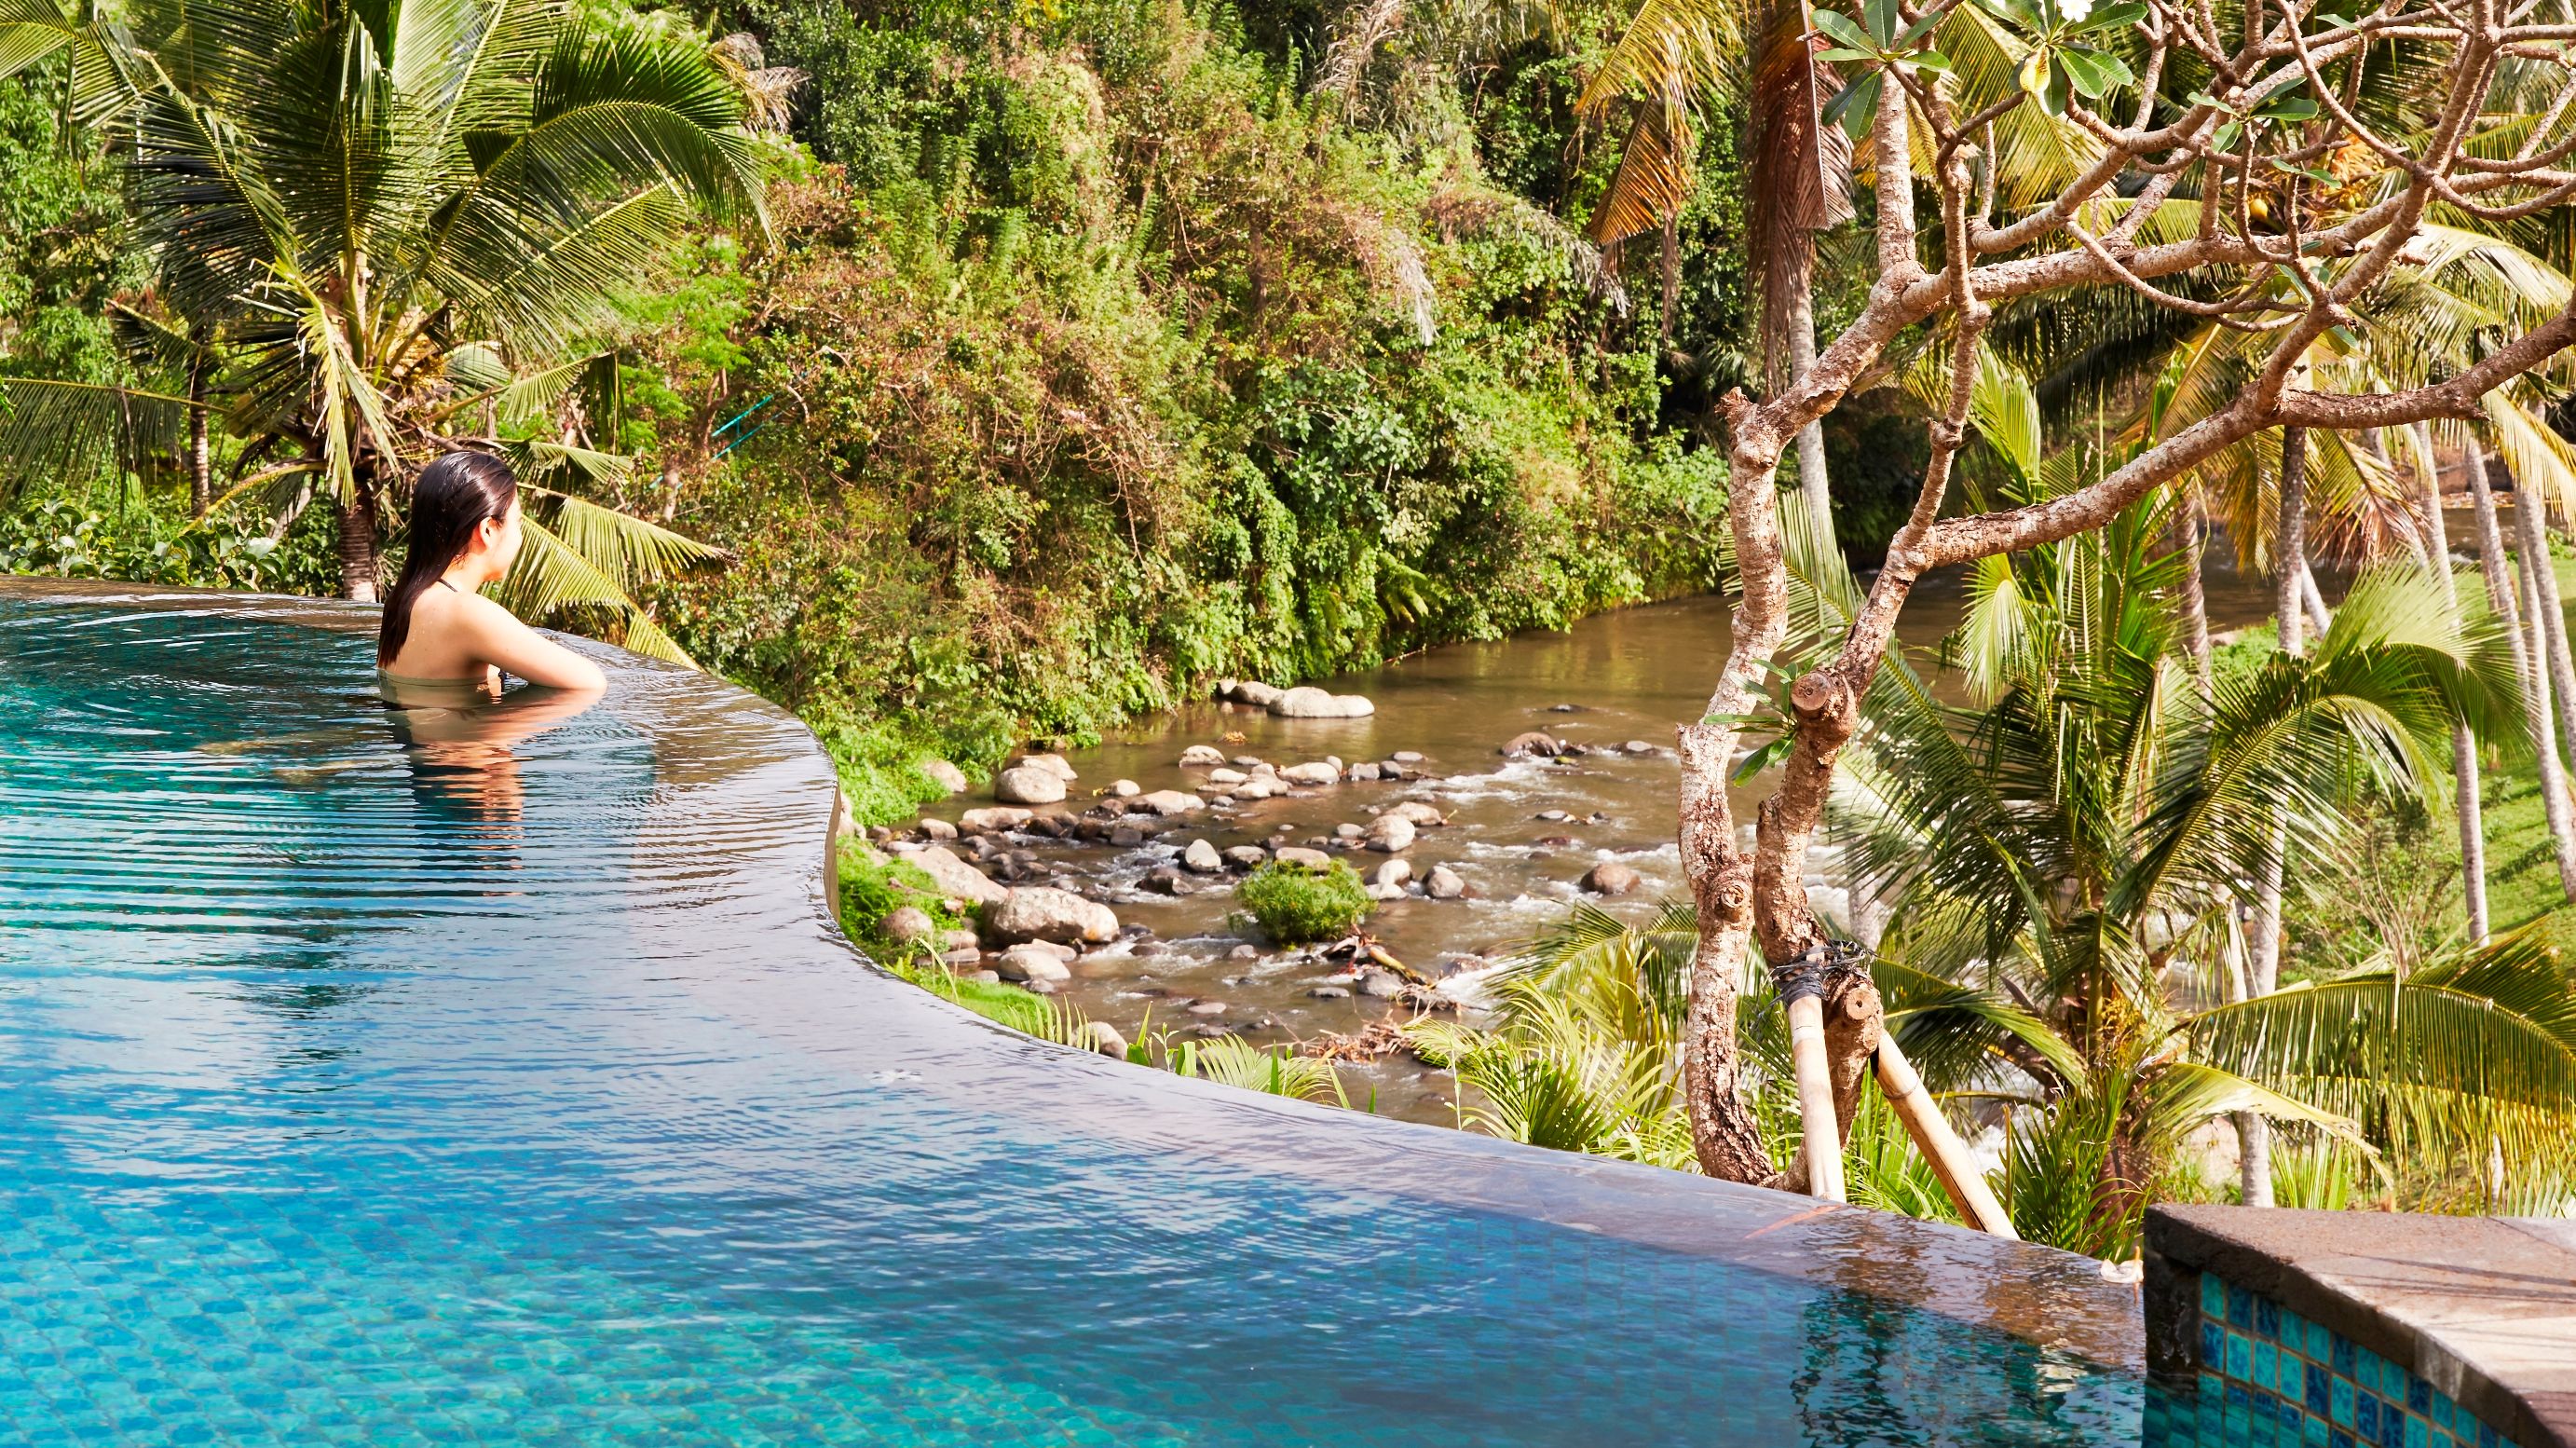 Woman gazes at the river from her perch in a turquoise, lagoon-style pool overlooking the rainforest